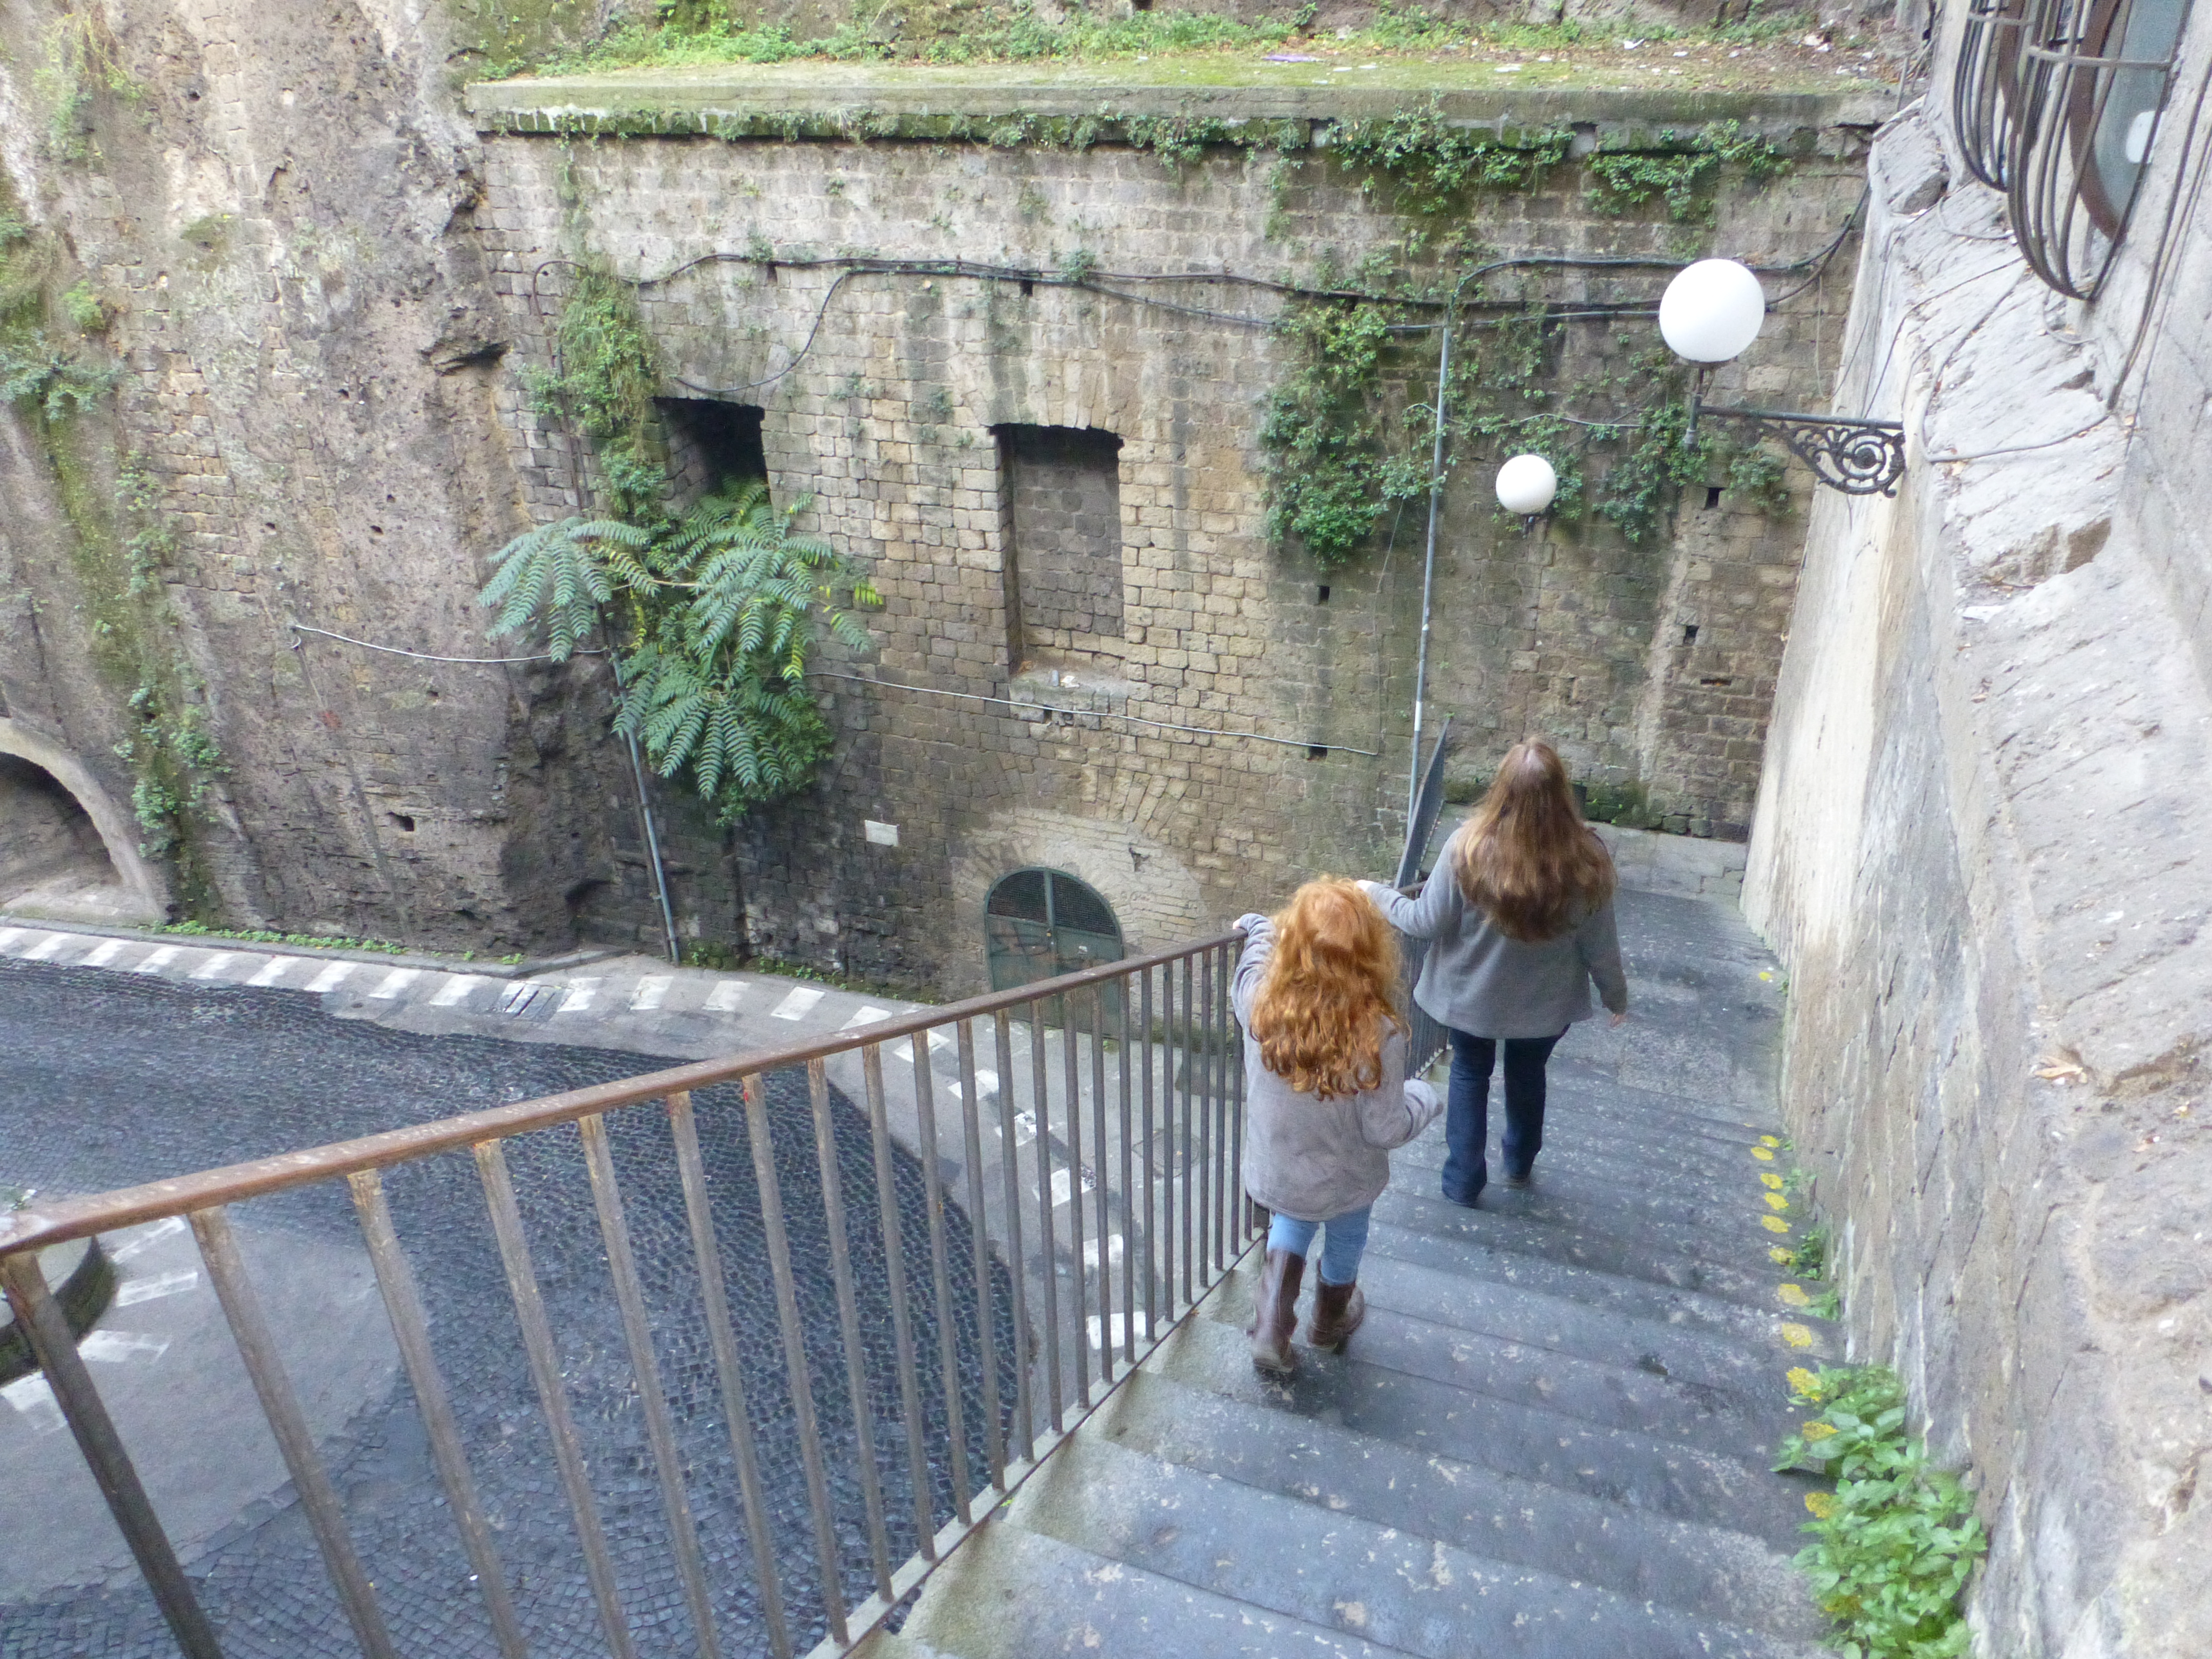 Steep stairs on route to the Grand Marina in Sorrento, Italy